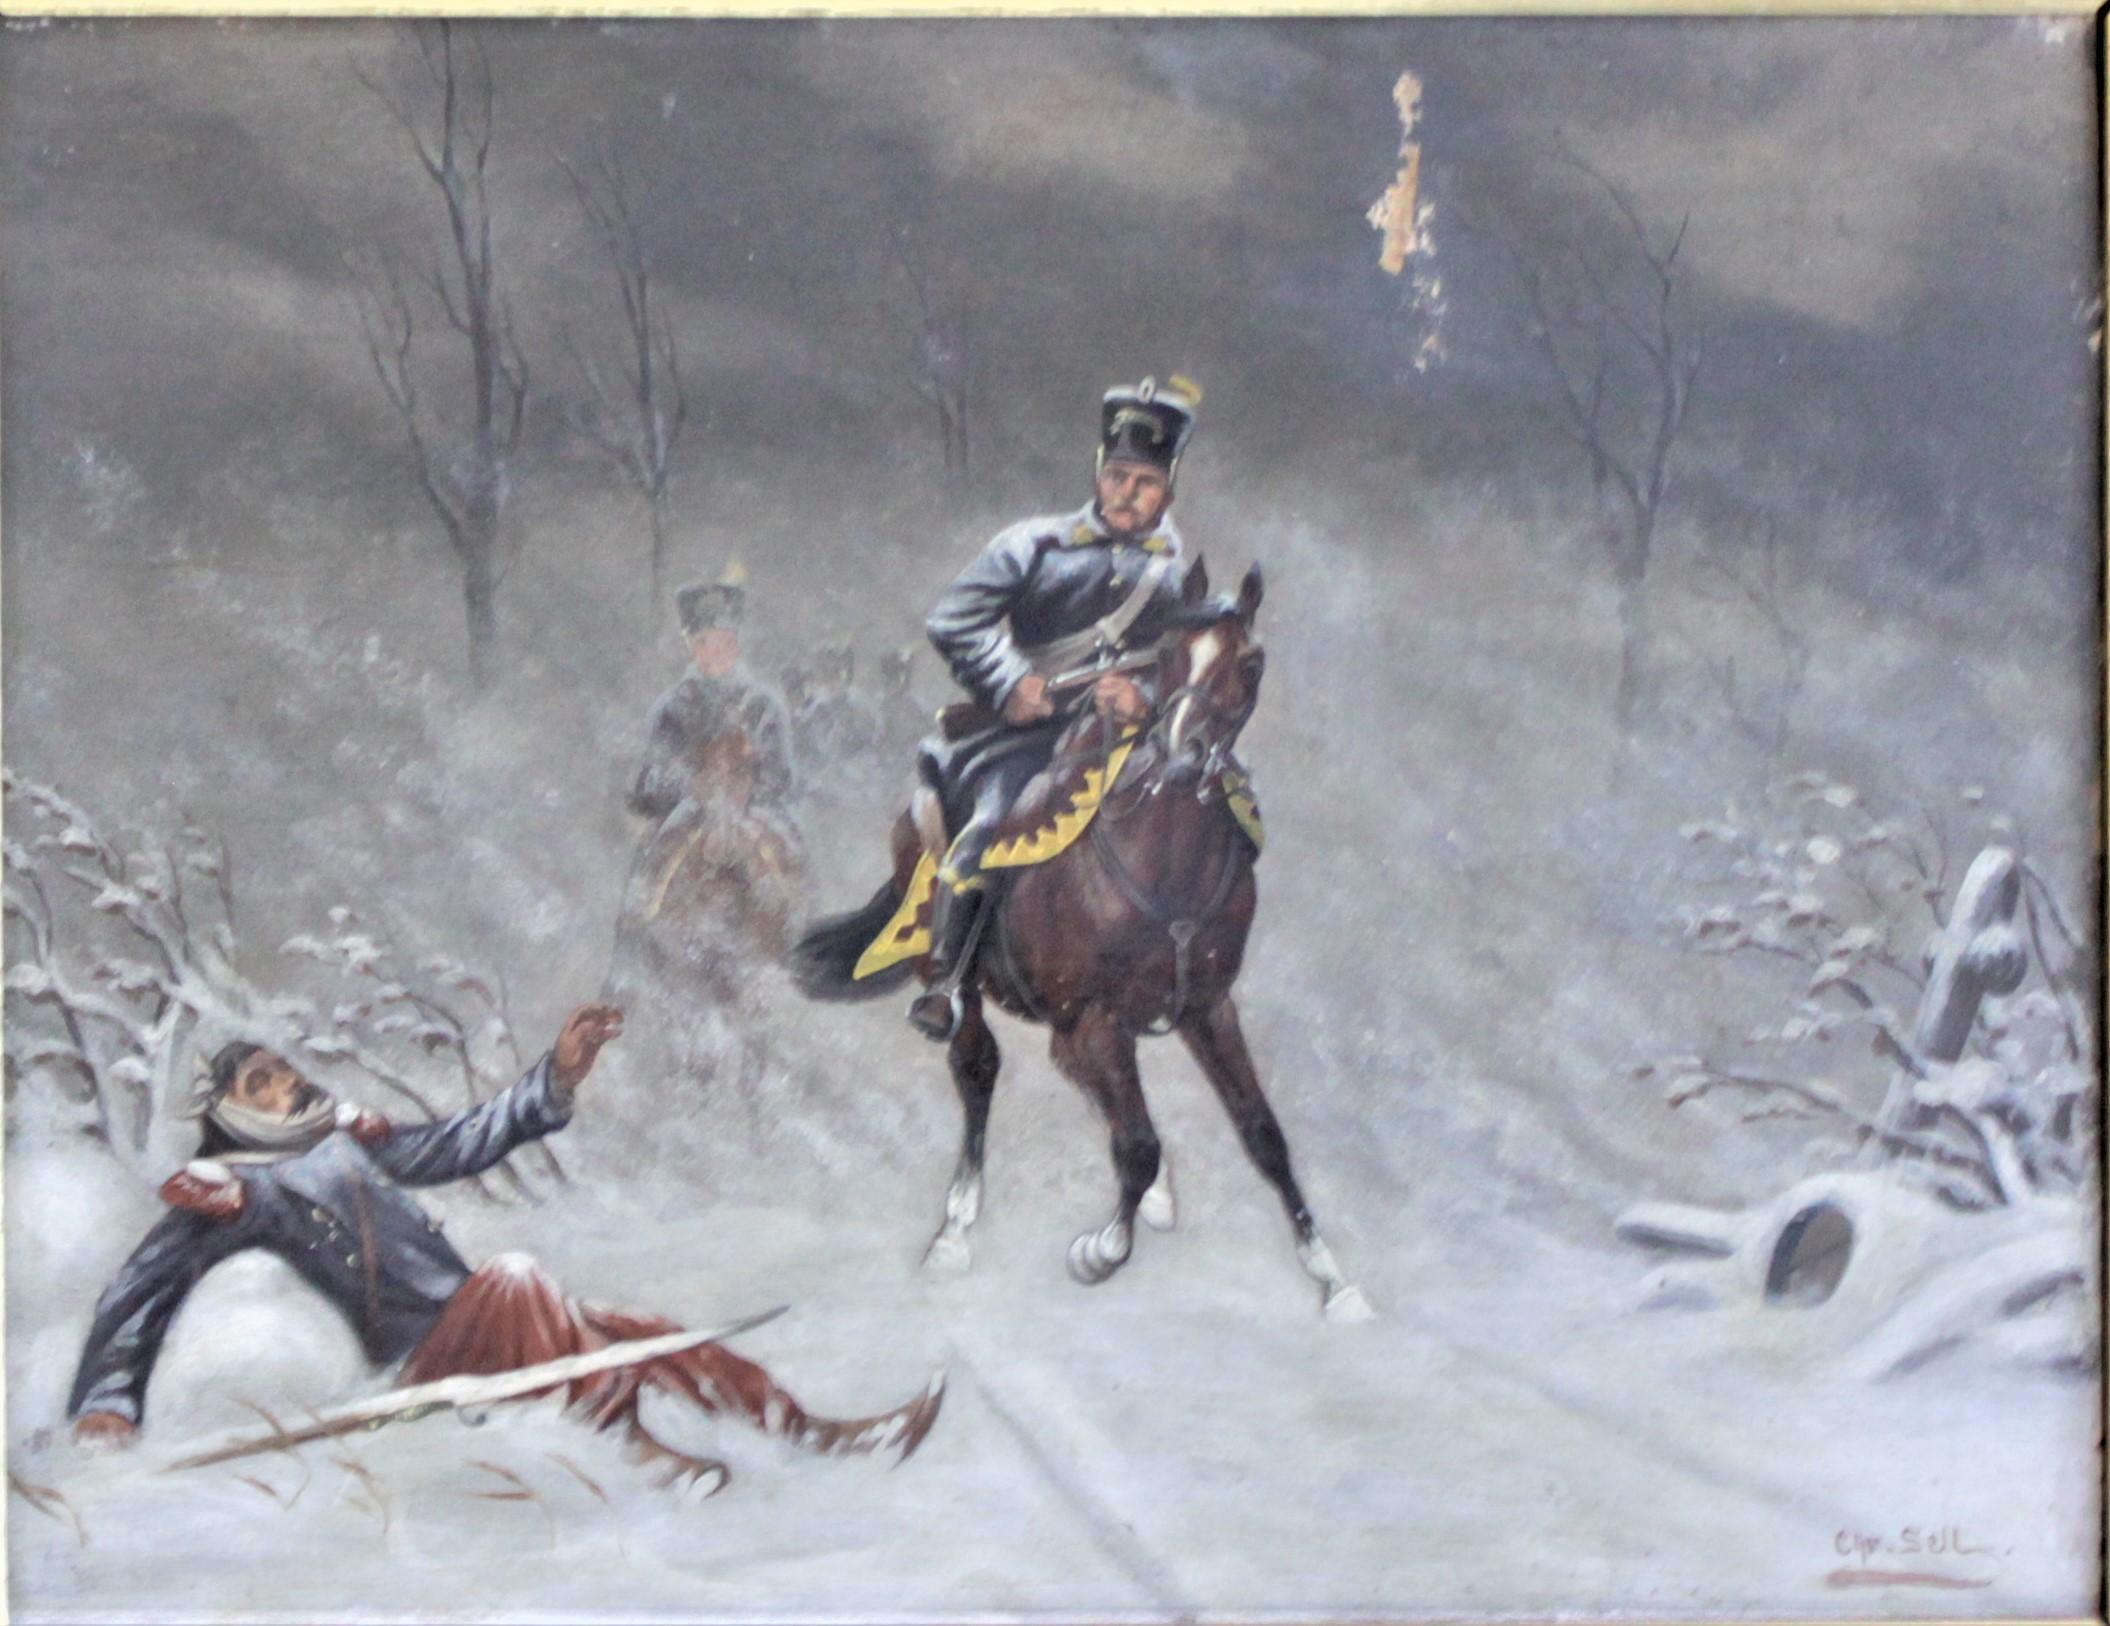 This well executed original oil painting on wood panel was done by Christian Sell the Younger in circa 1880 in his realistic style. The painting portrays soldiers on horseback in the battlefield during a severe winter snowstorm and in the